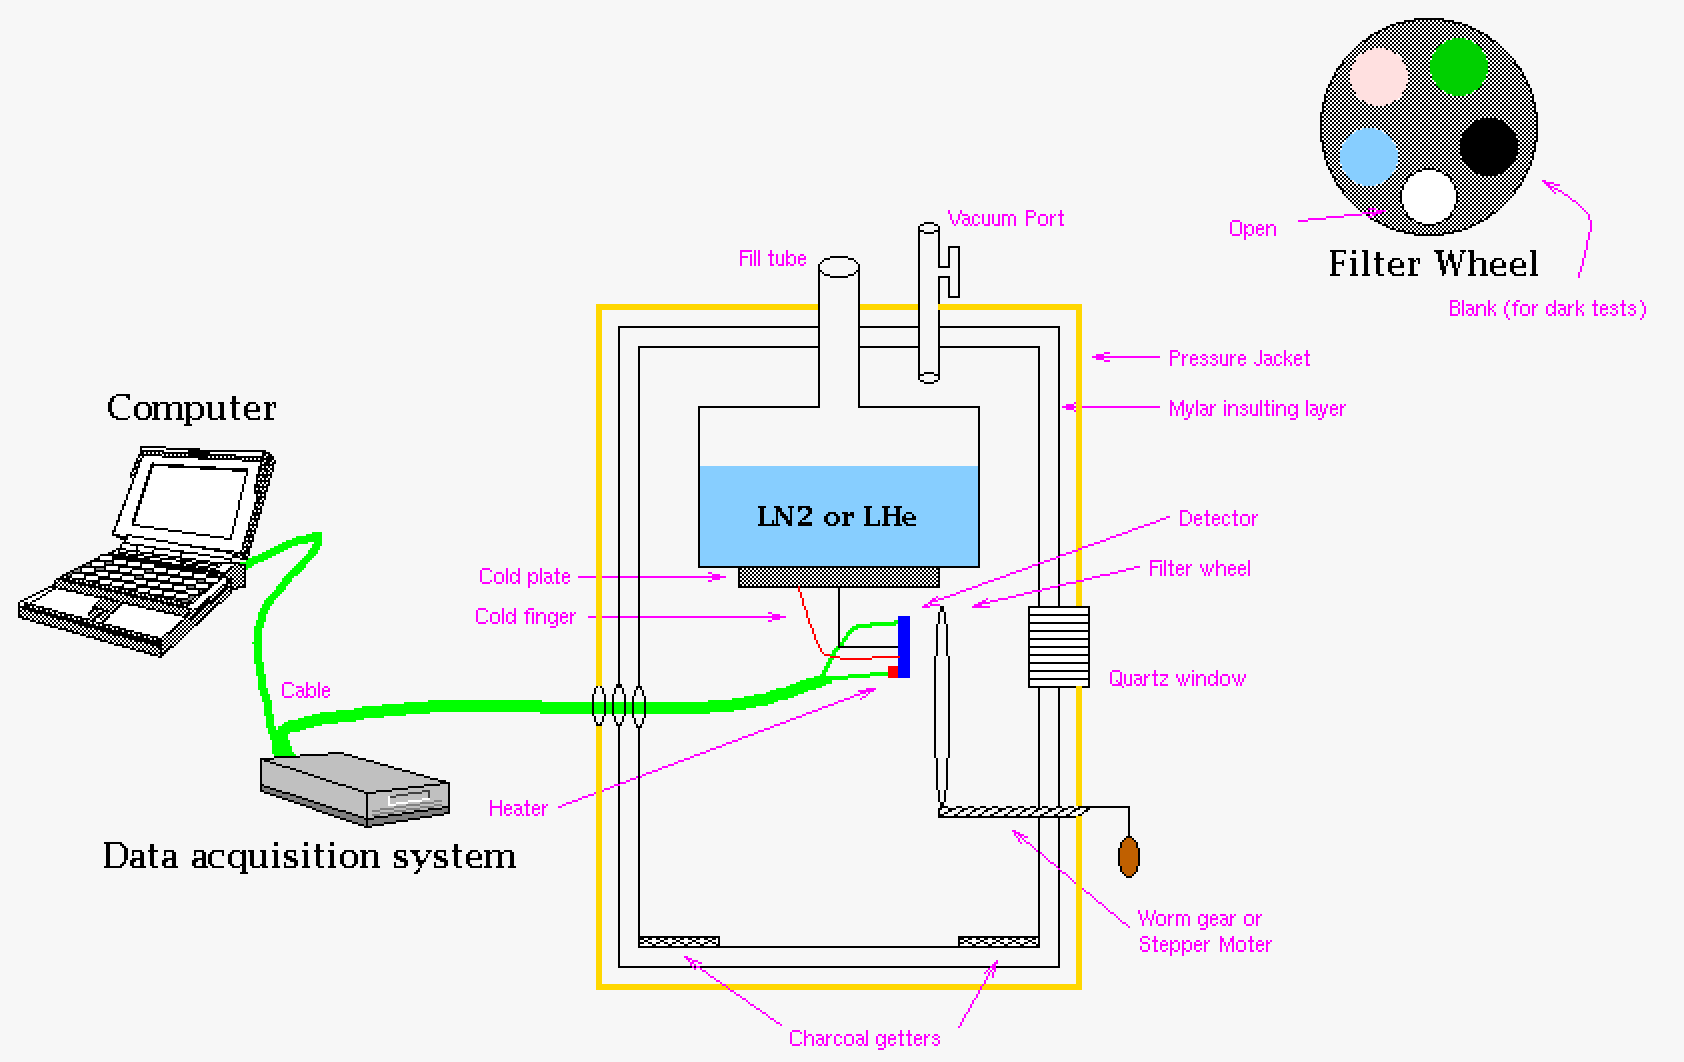 Sketch of liquid cryostat (referred to as a Dewar). Filter wheel, computer, and data acquisition system is also sketch to show the interaction between the Dewar, the detector, and the data acquisition system.